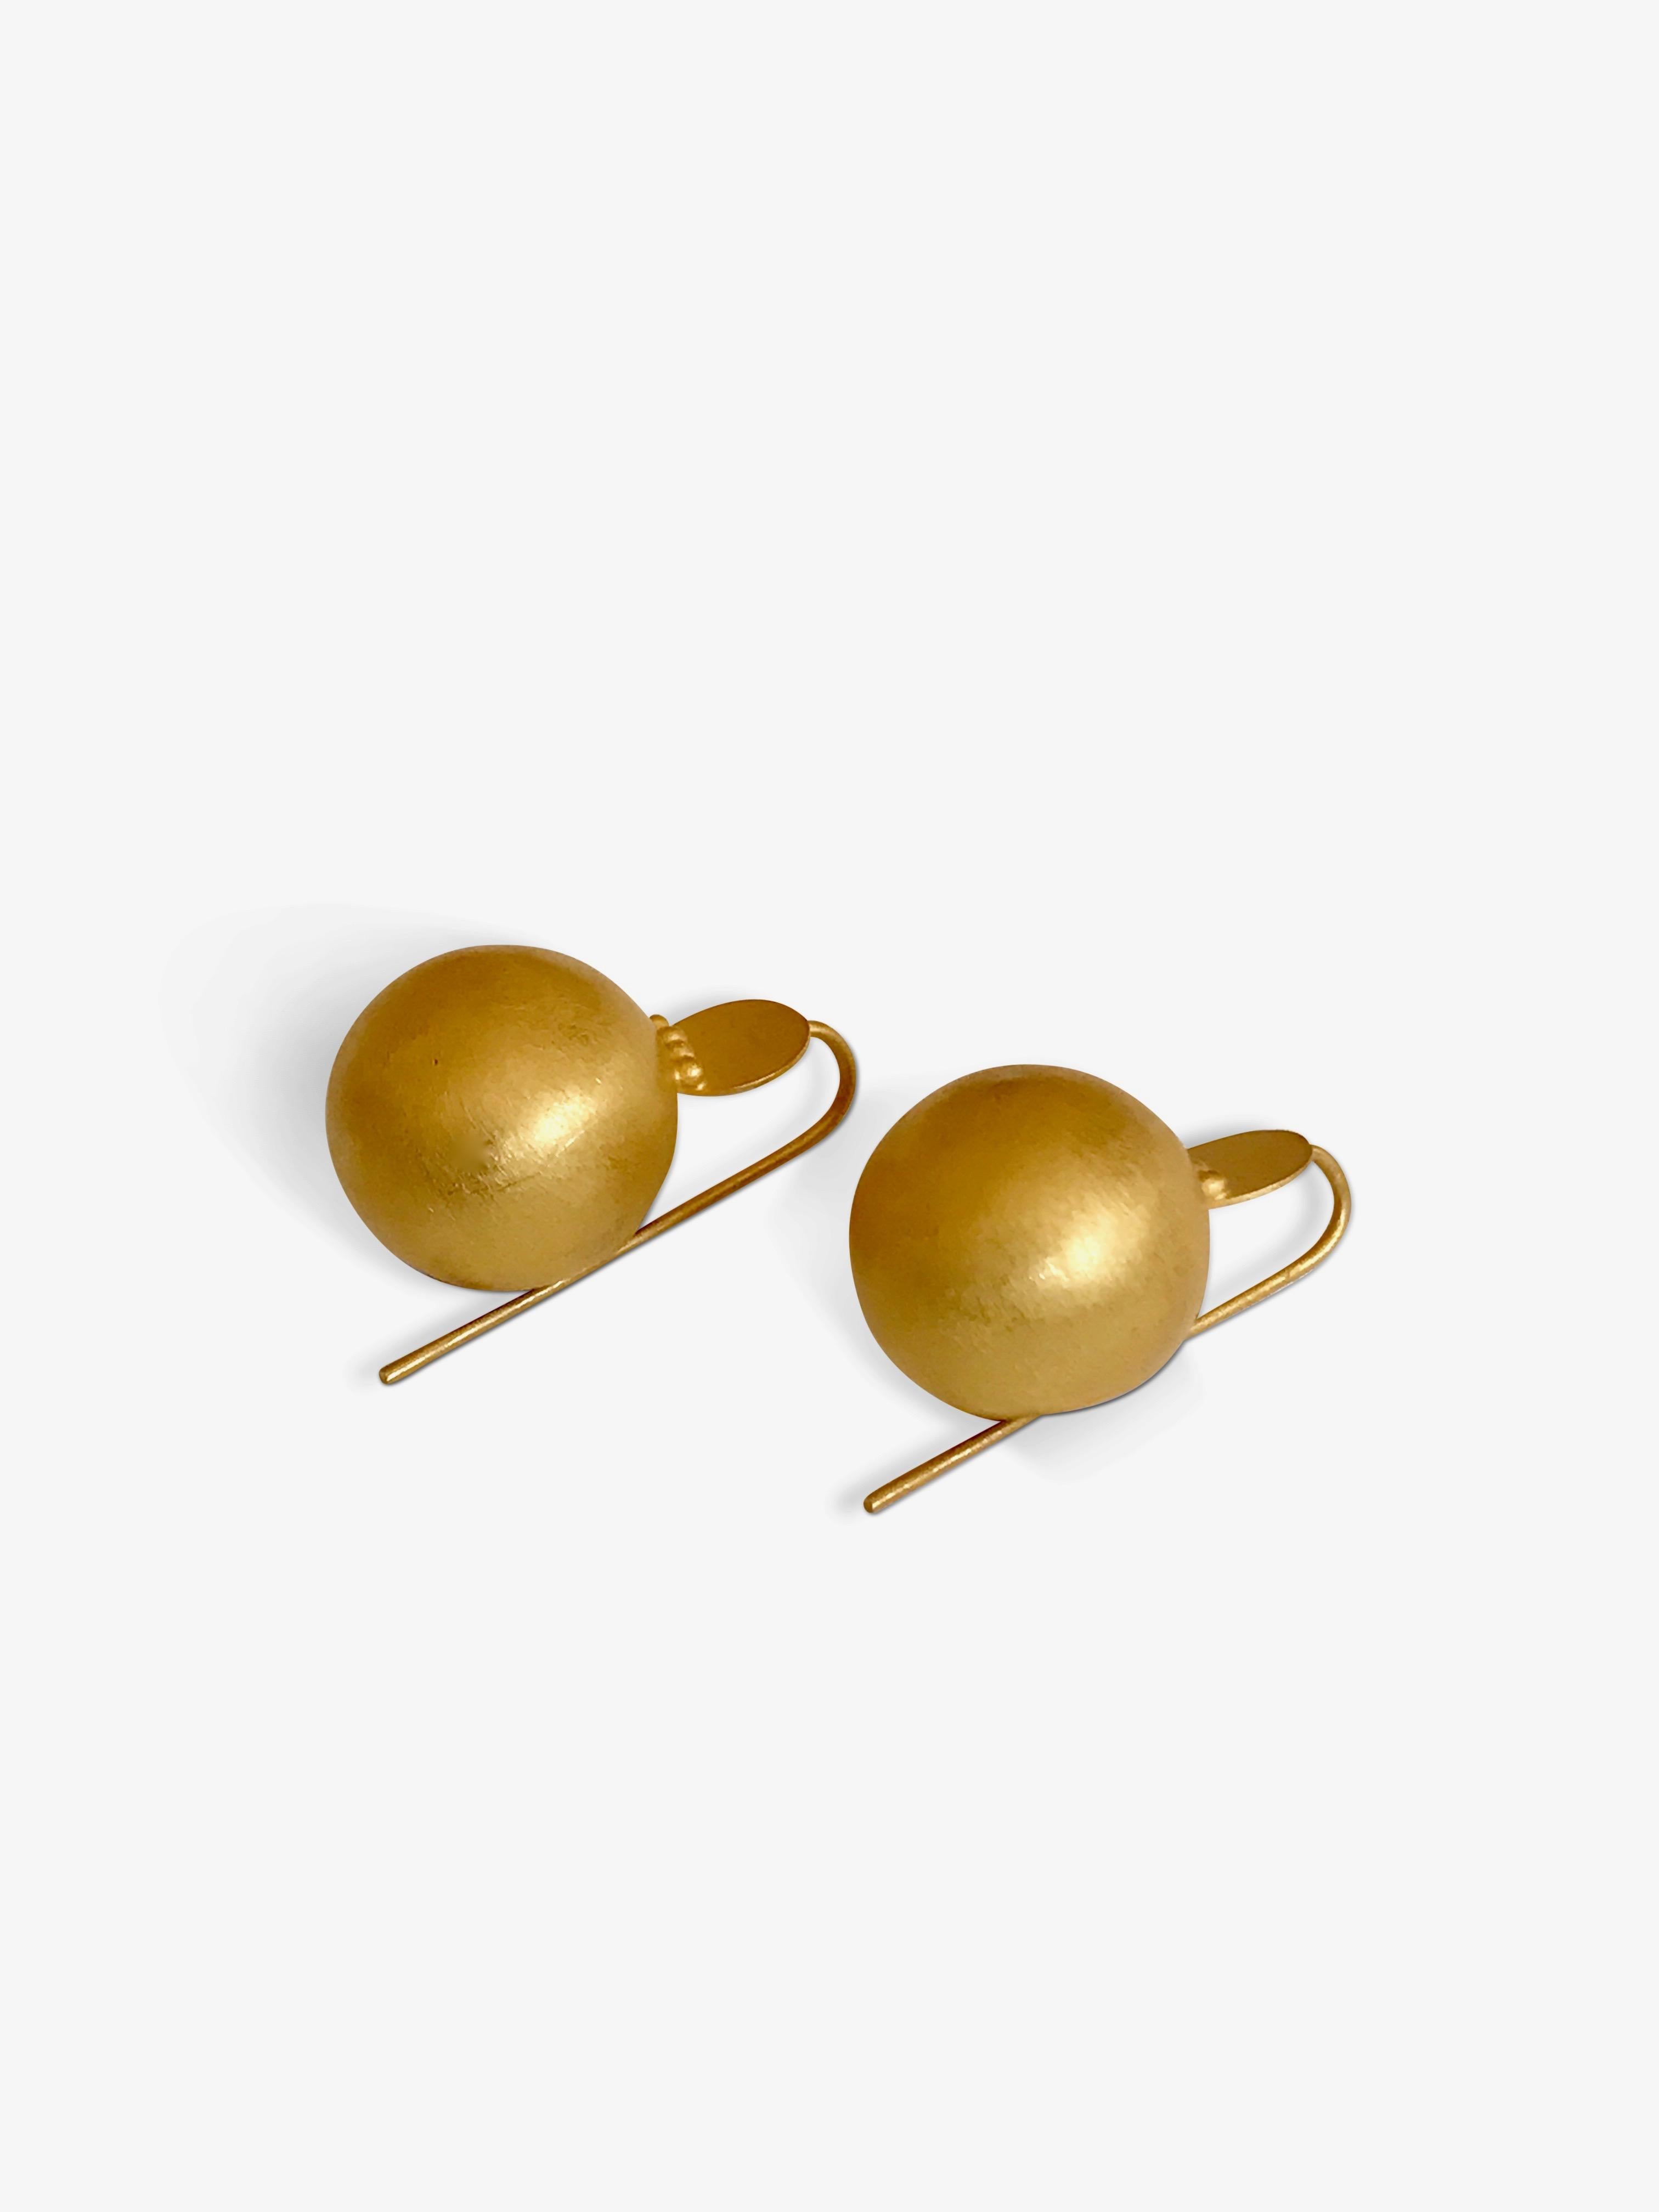 Handmade solid yellow gold earrings in a satin and patina finish inspired by ancient jewels.
Easy to wear any time of the day with any type of outfit throughout the year.
Hallmark: London Goldsmiths’ Company – Assay Office ( laser mark on the pins